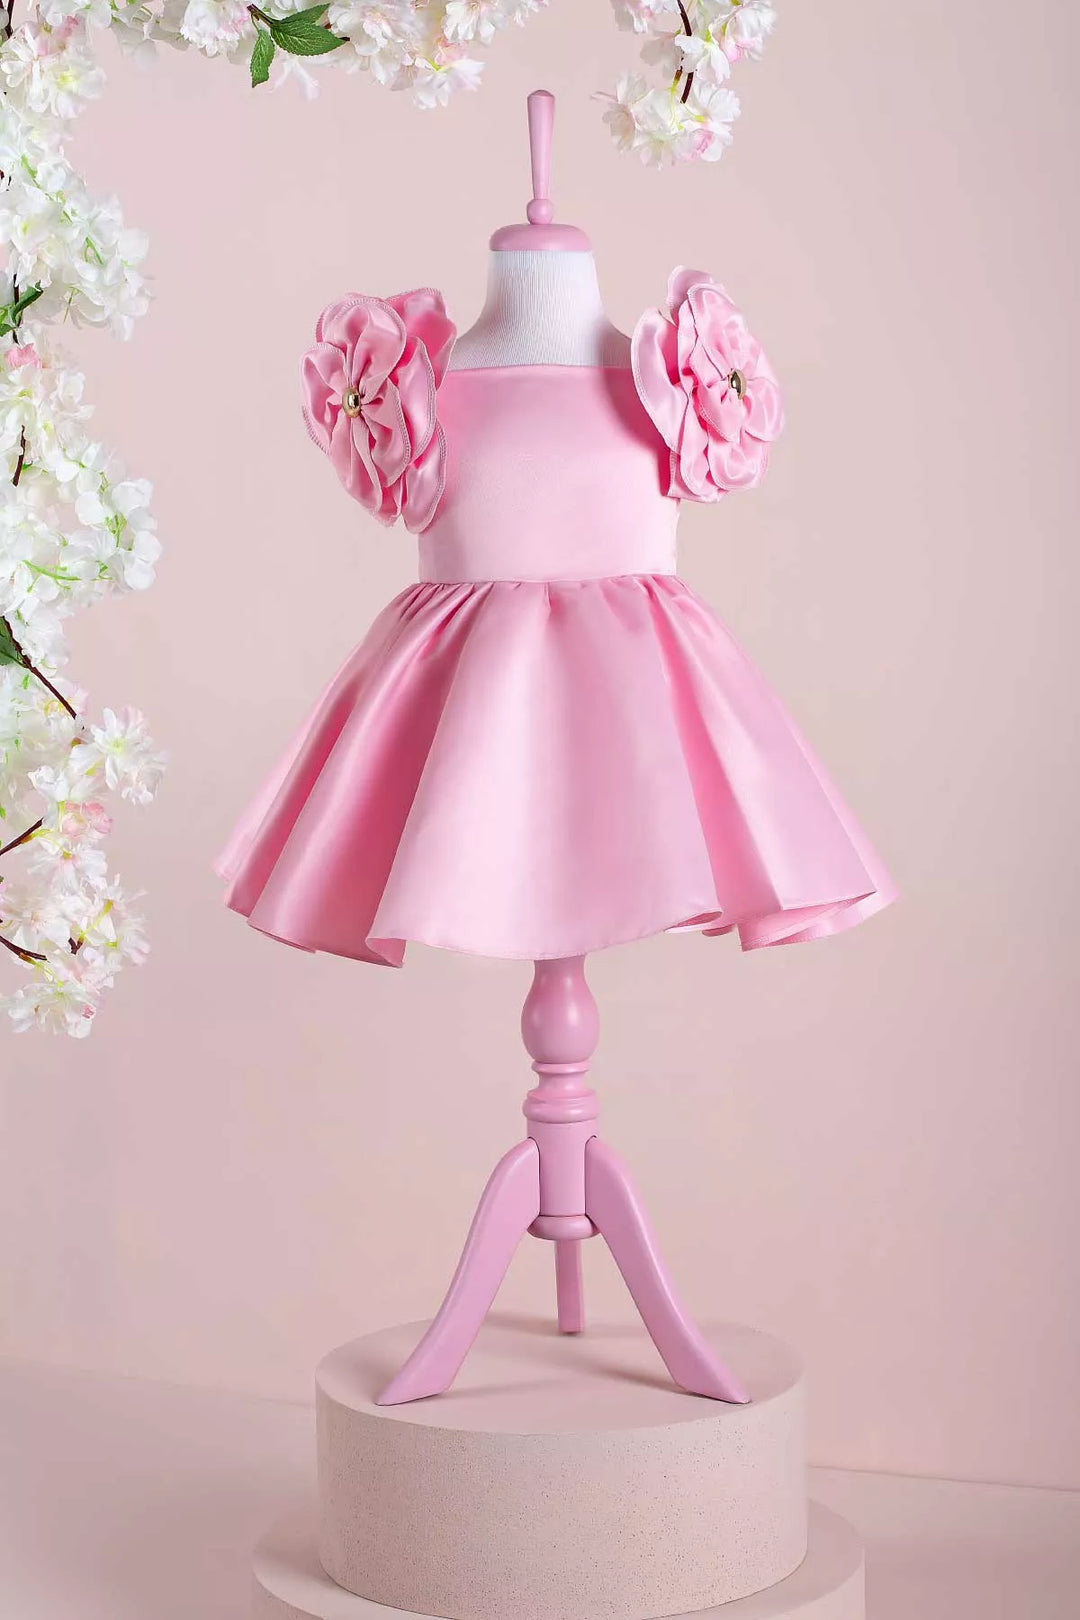 Pink party dress